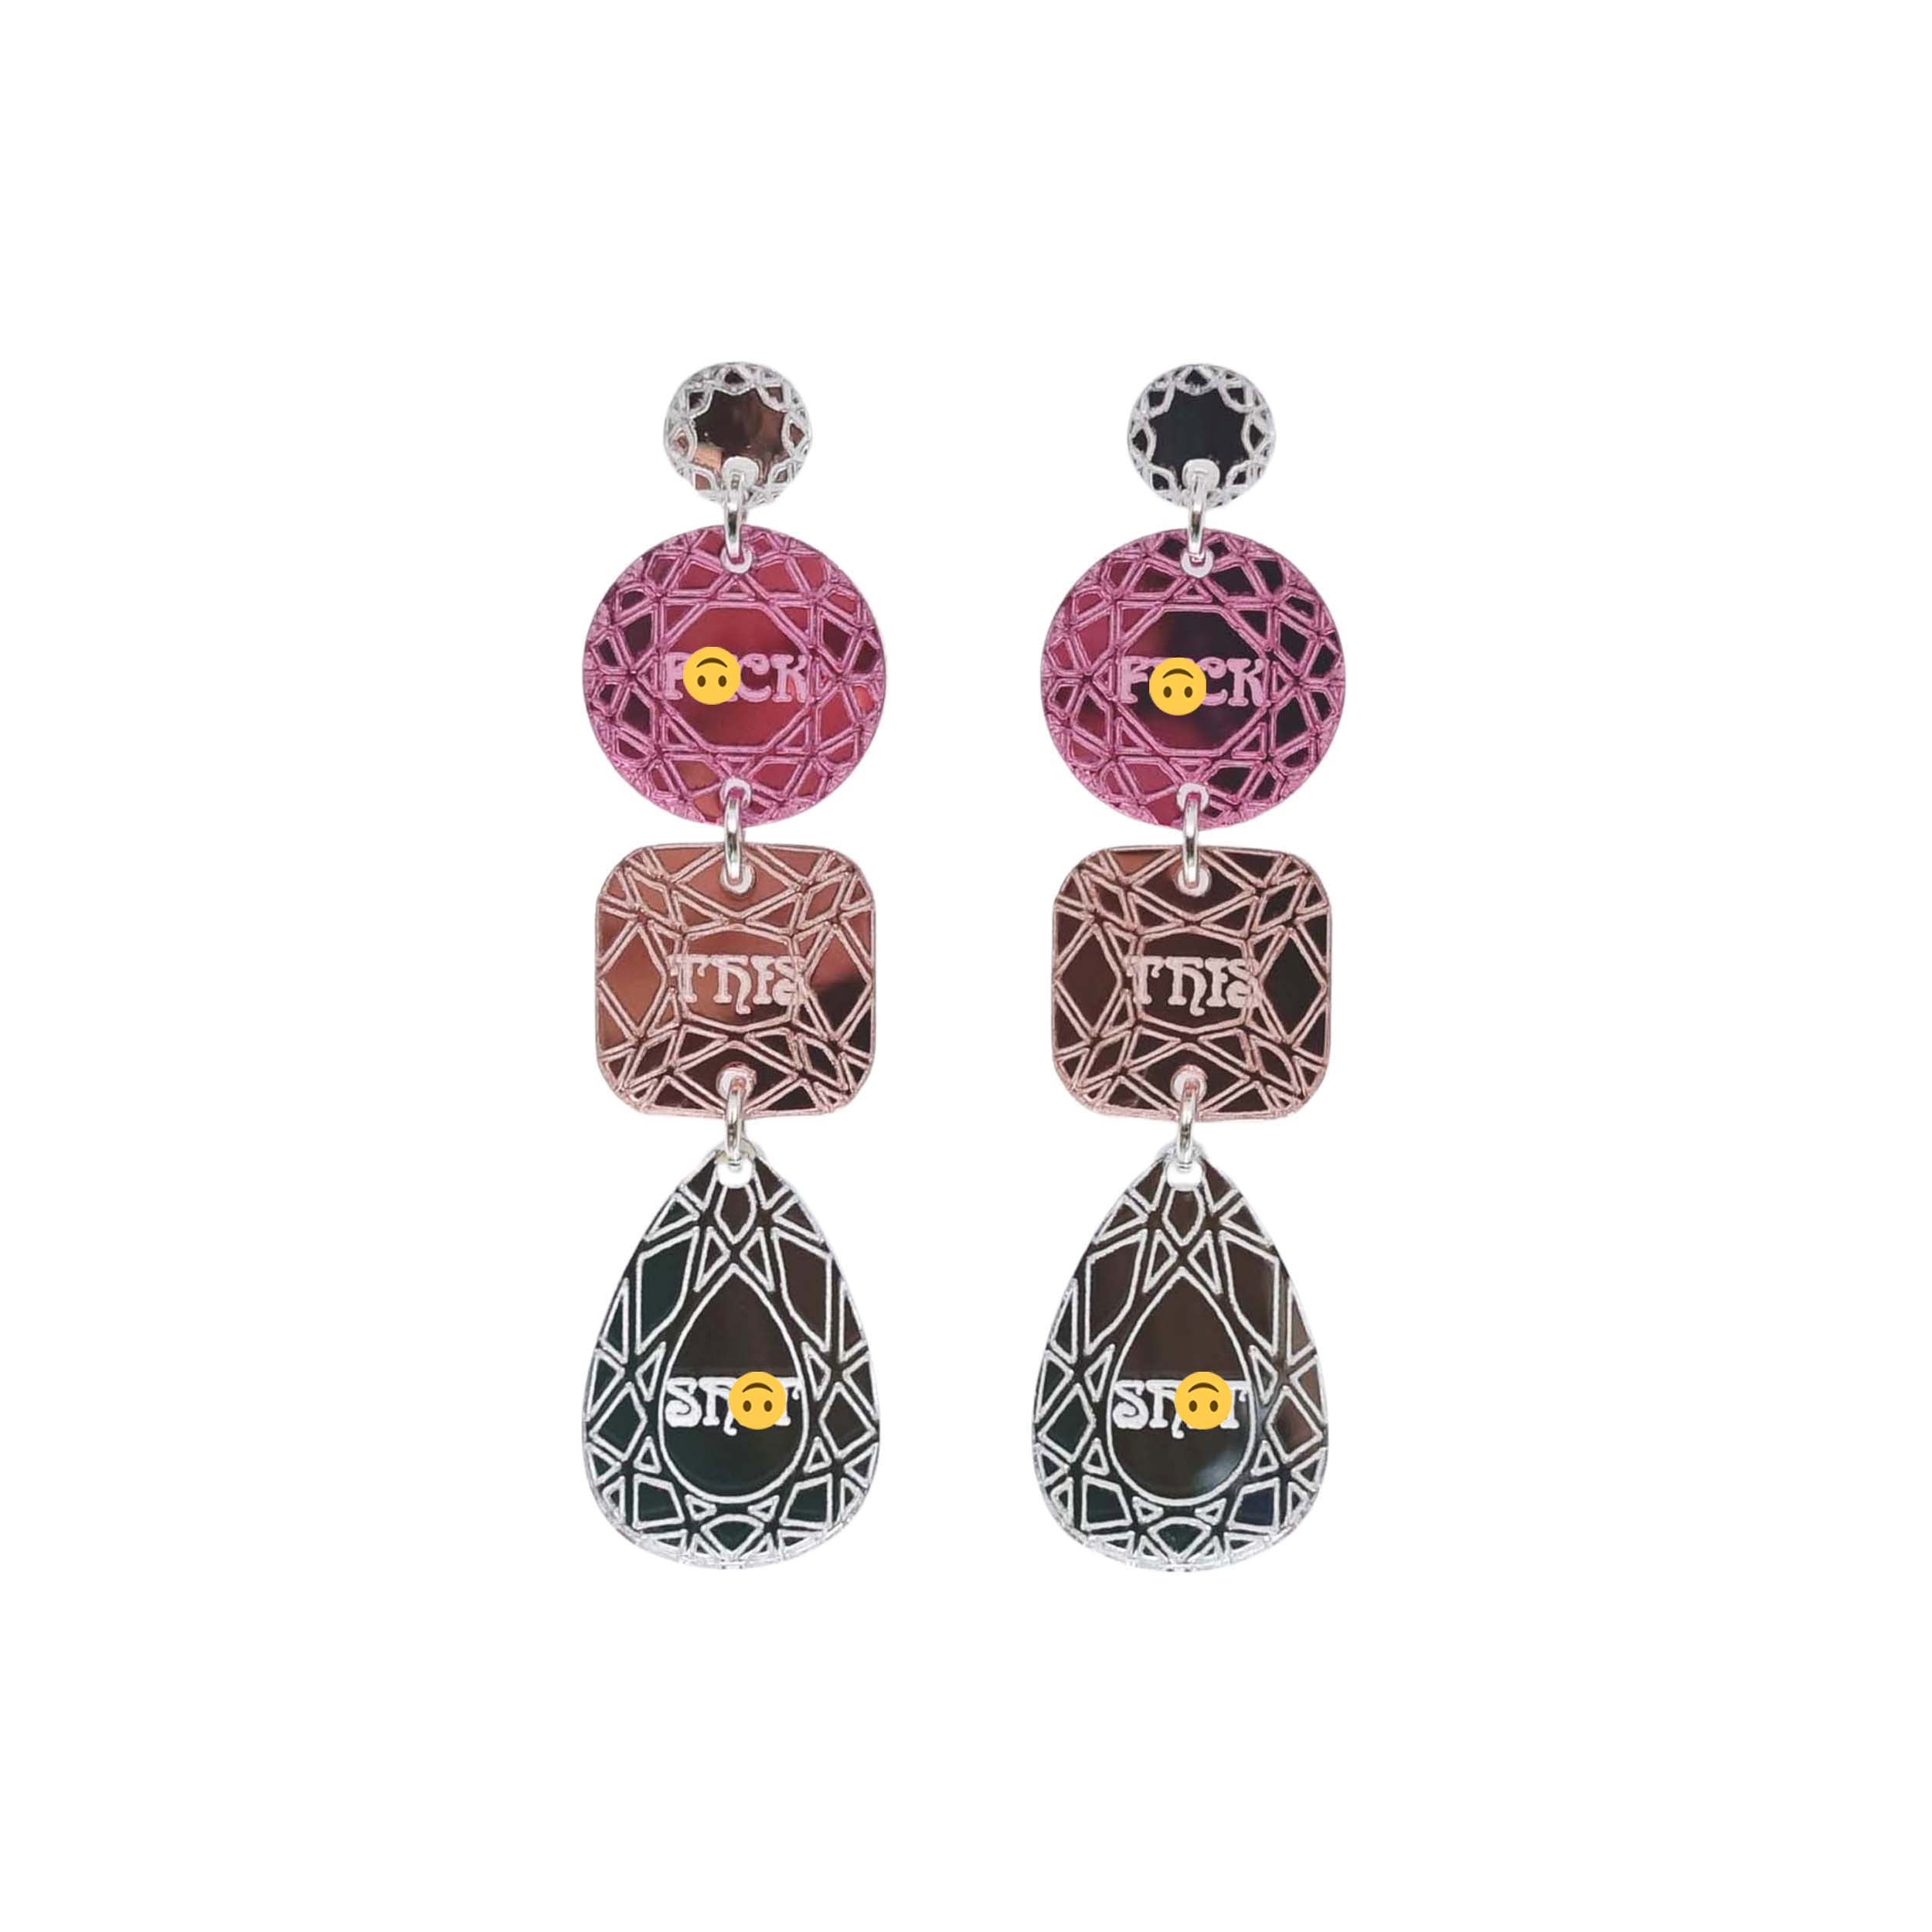 Sweary austerity jewel earrings in pink, rose gold and silver shown hanging against white background. 